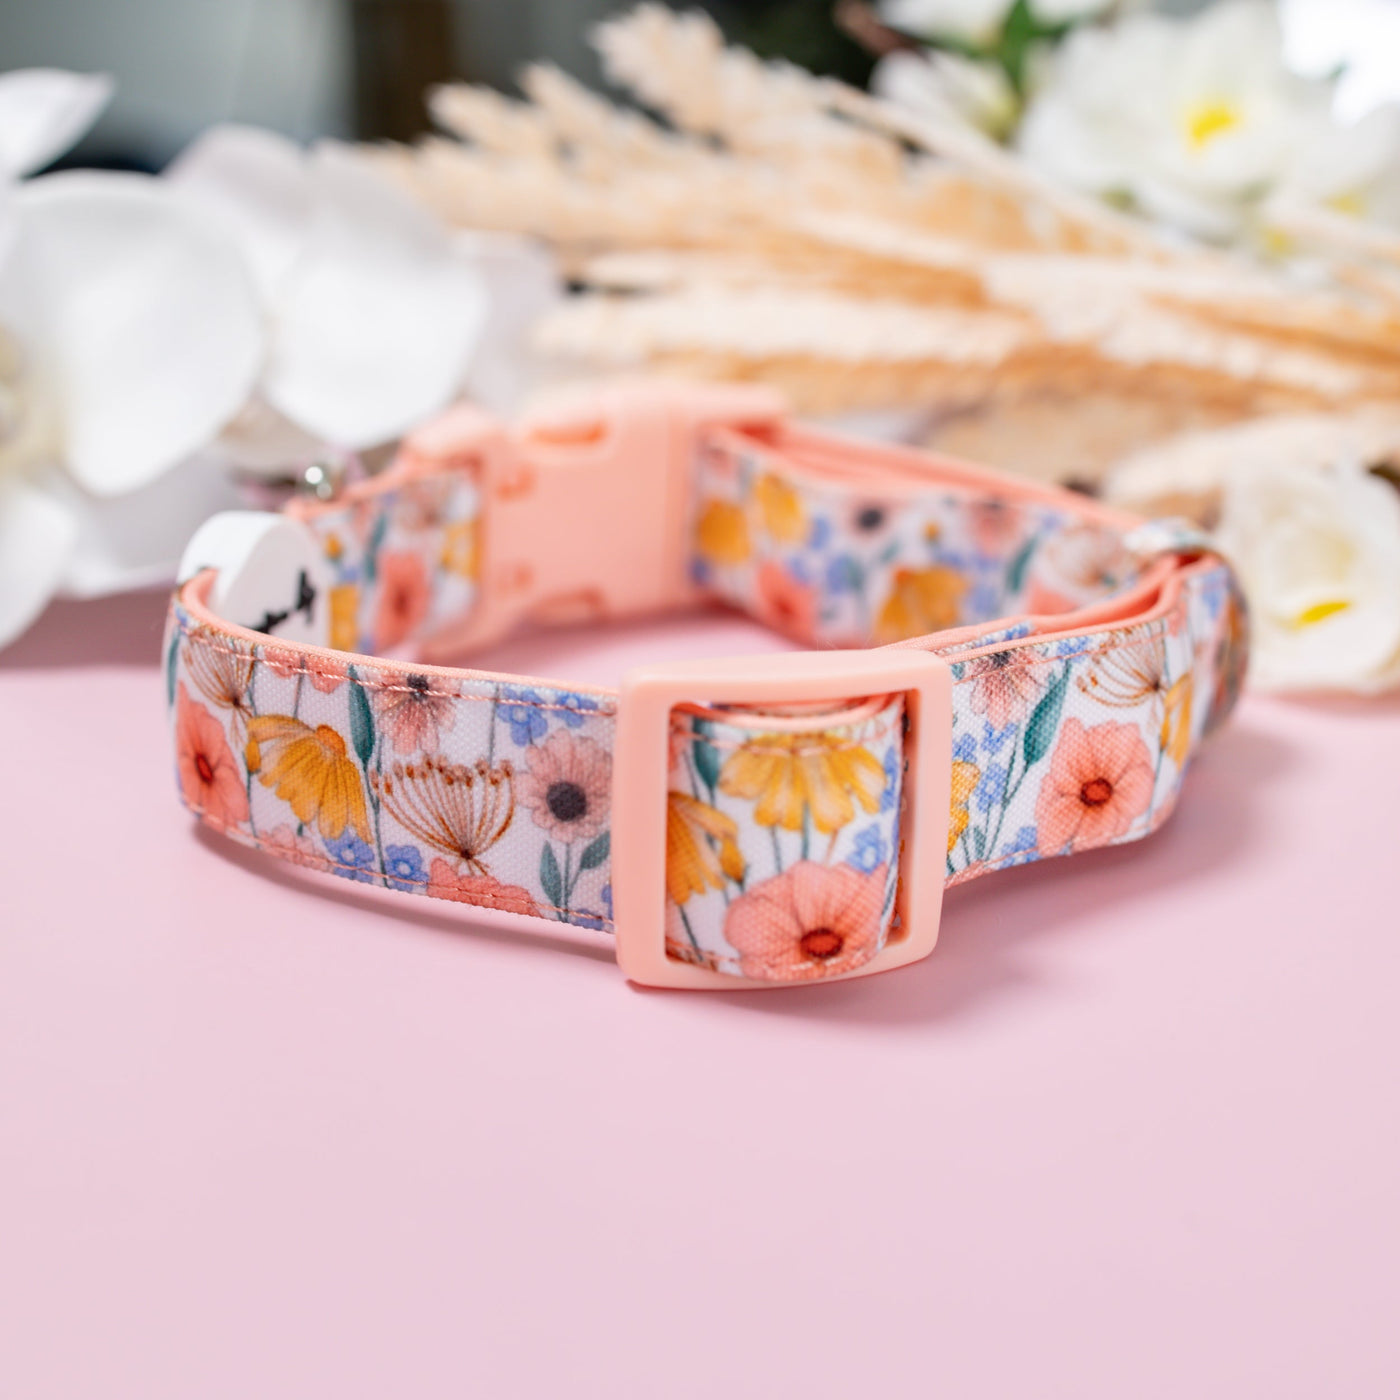 Extra Wide // Peachy Posies Dog Collar | Canvas & Neoprene Dog Collar-Dog Collar-Dizzy Dog Collars